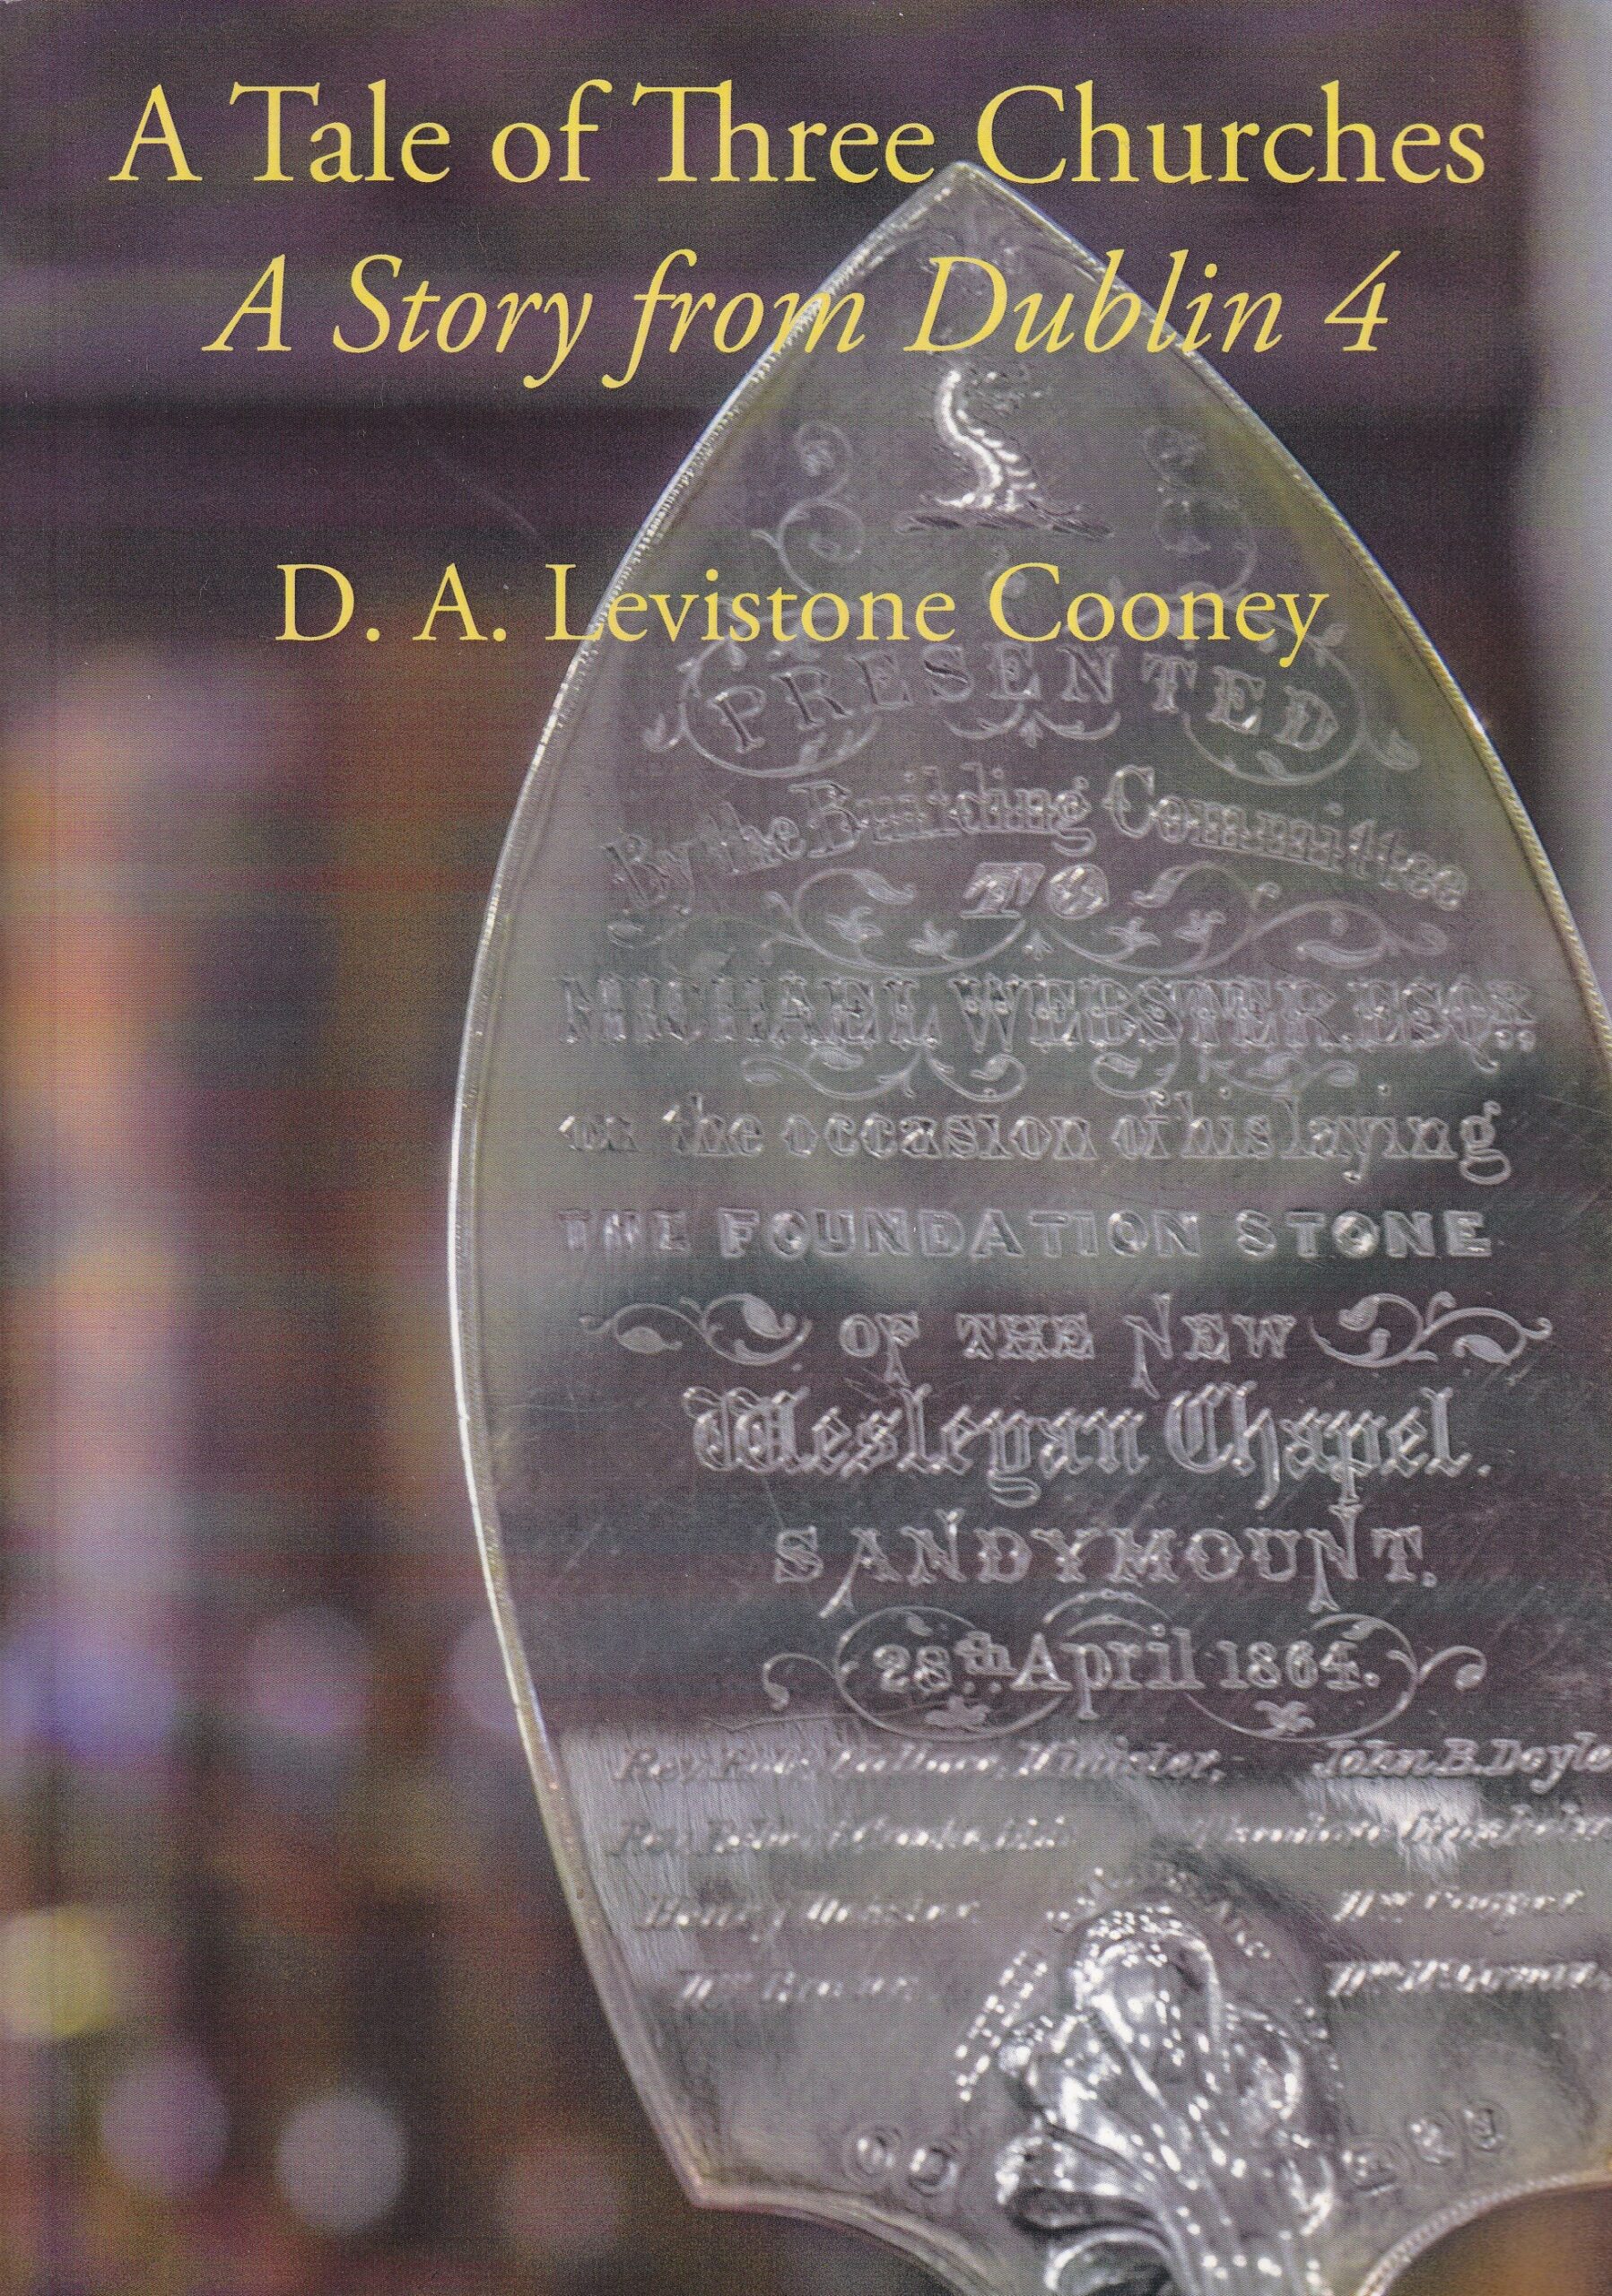 A Tale of Three Churches: A Story from Dublin 4 | D.A. Levistone Cooney | Charlie Byrne's